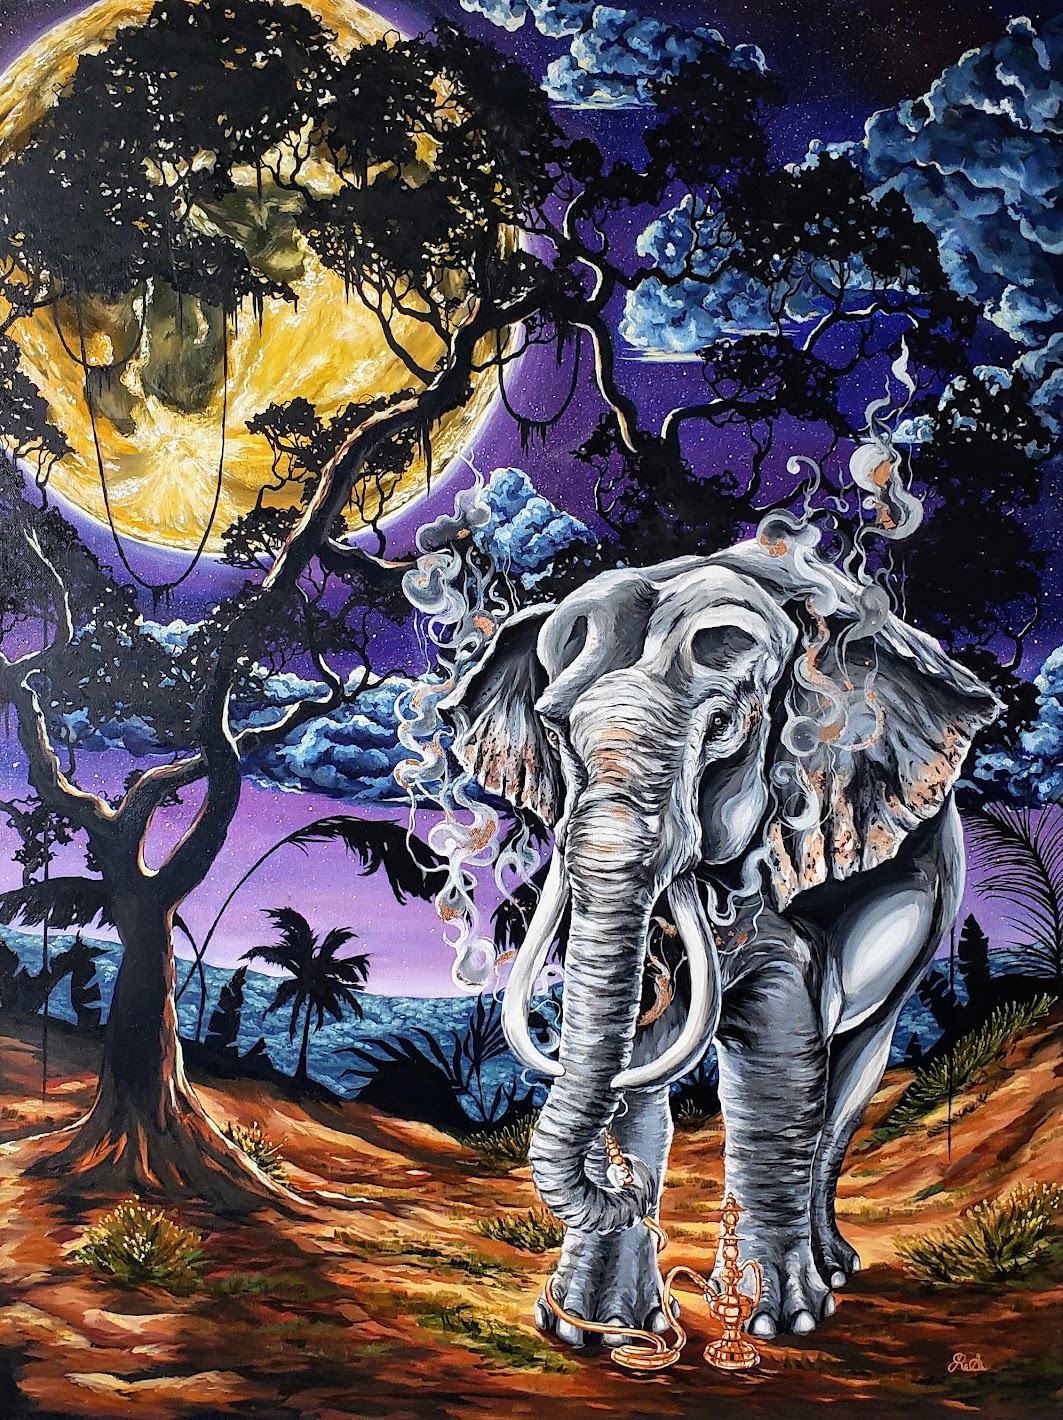 "Hathi", 24" x 36", Oil on canvas - 2021, Prints available